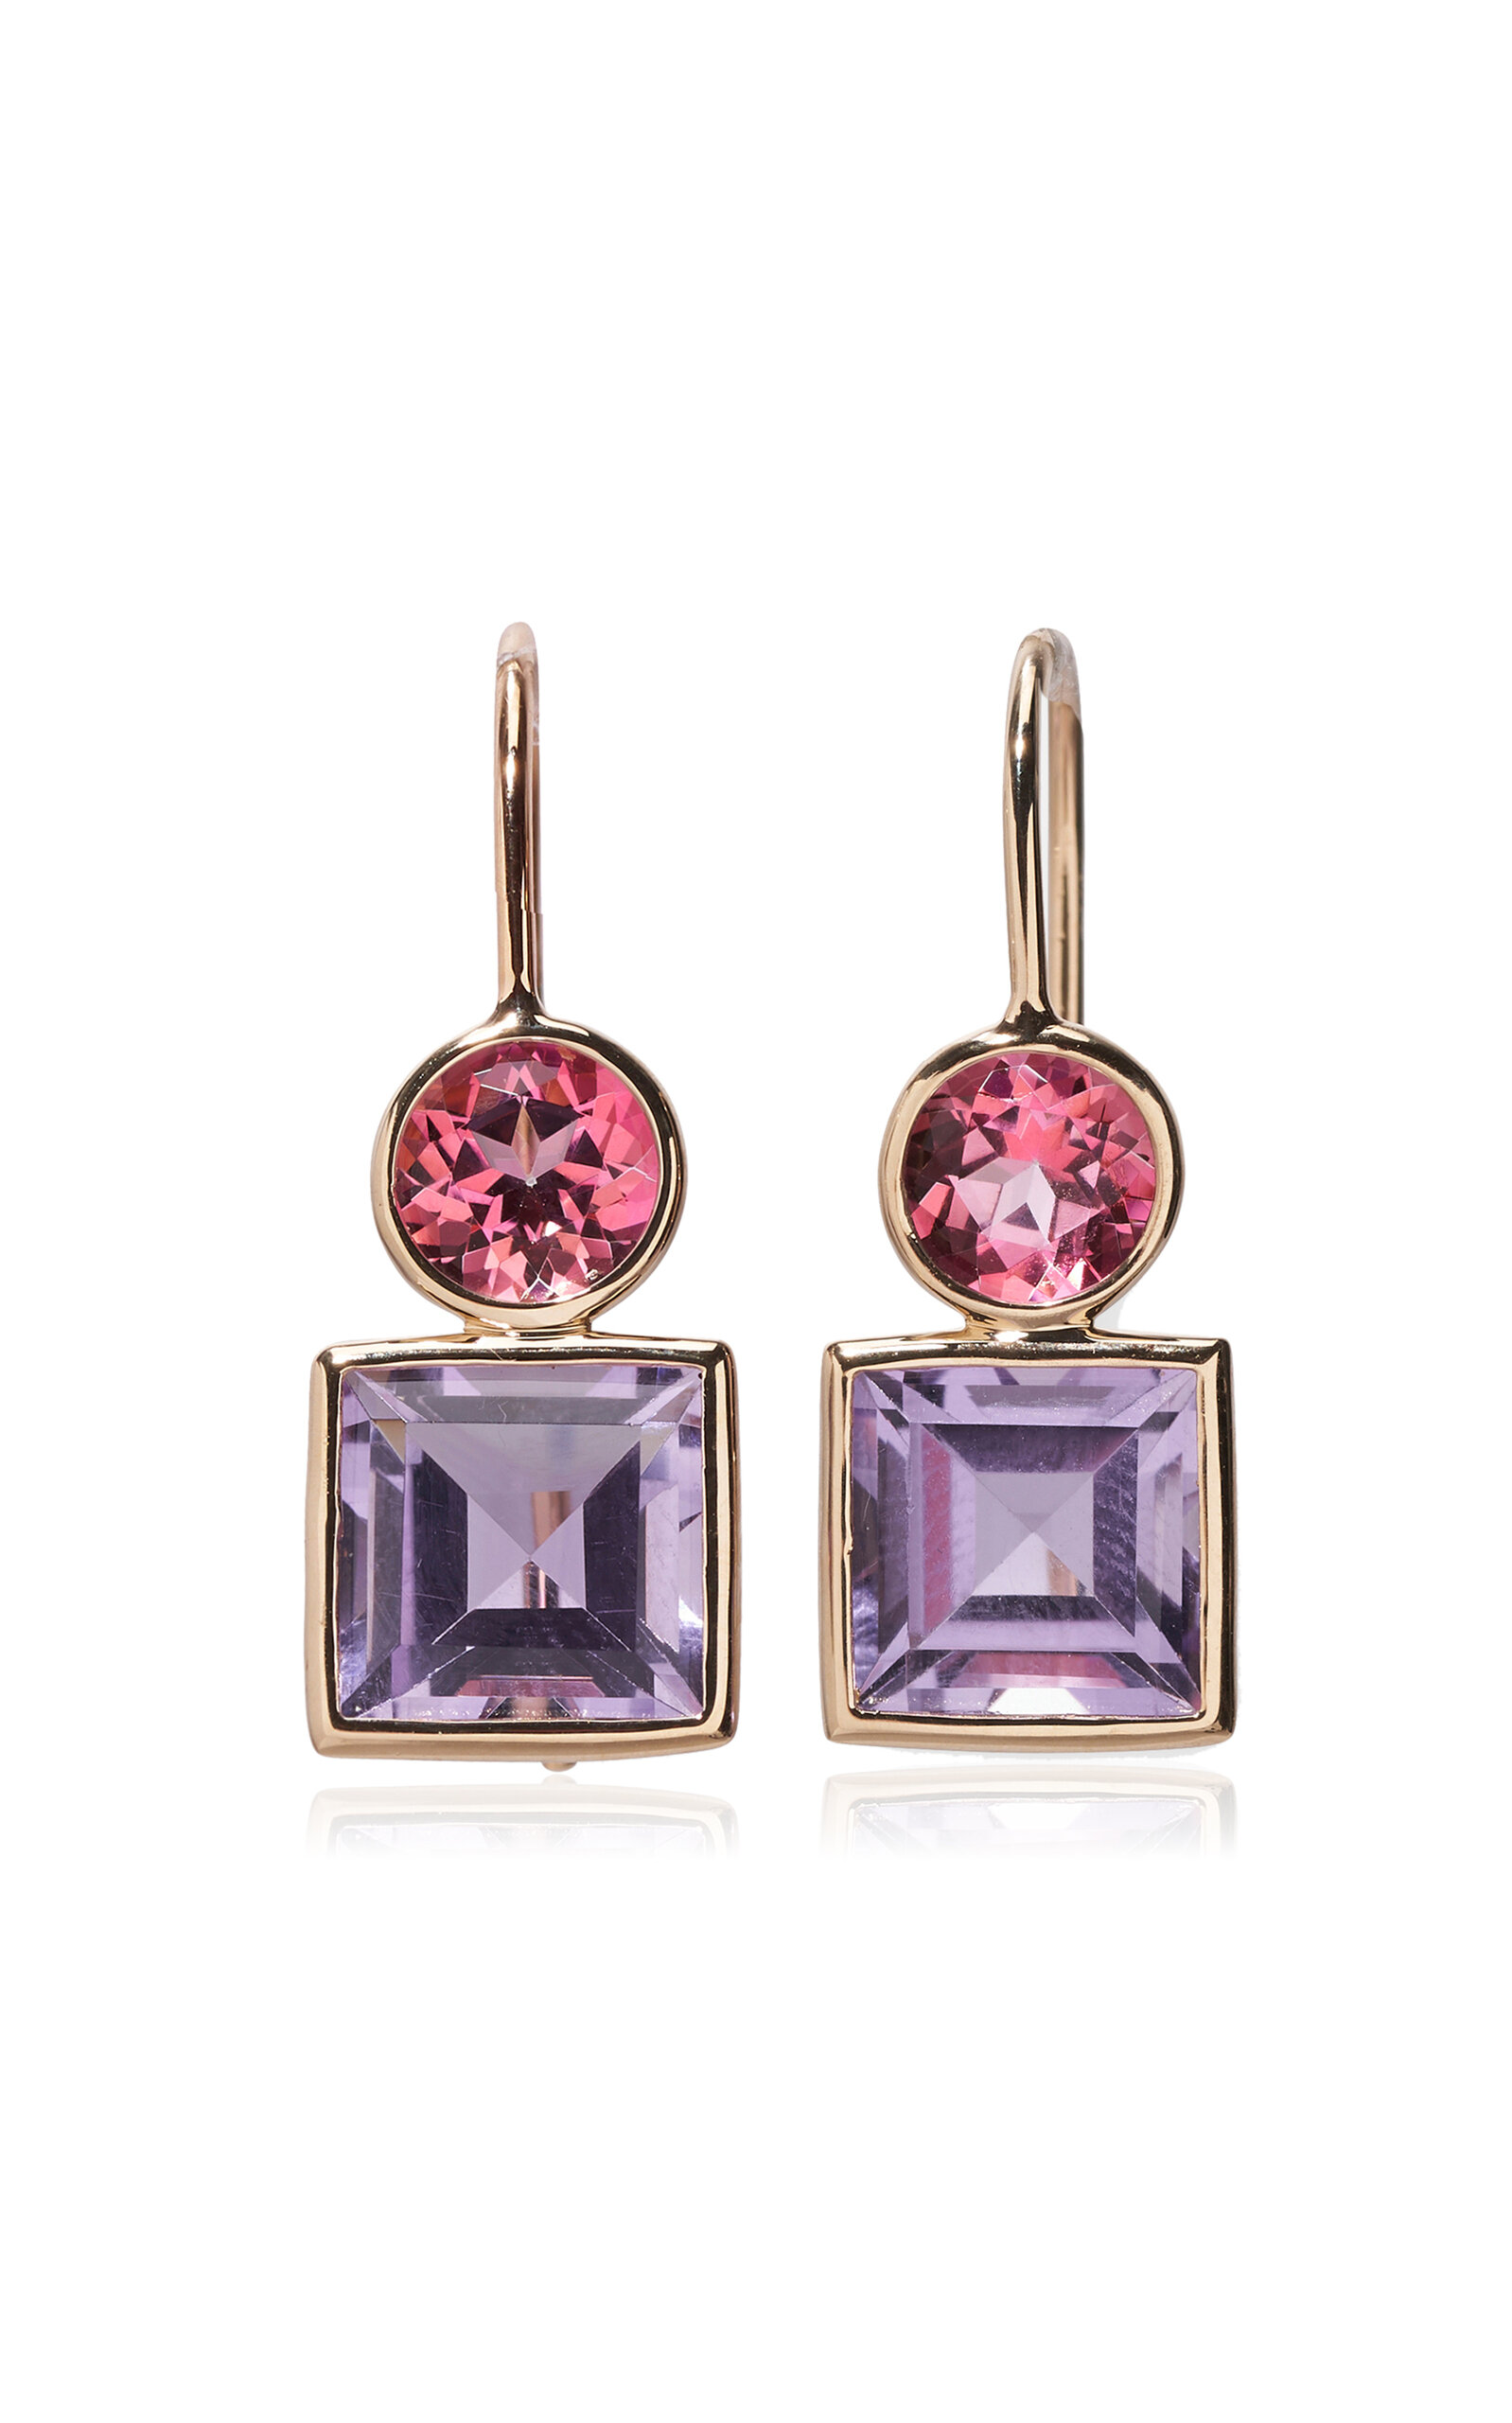 Exclusive Pastille Pink Topaz and Amethyst Drop Earrings